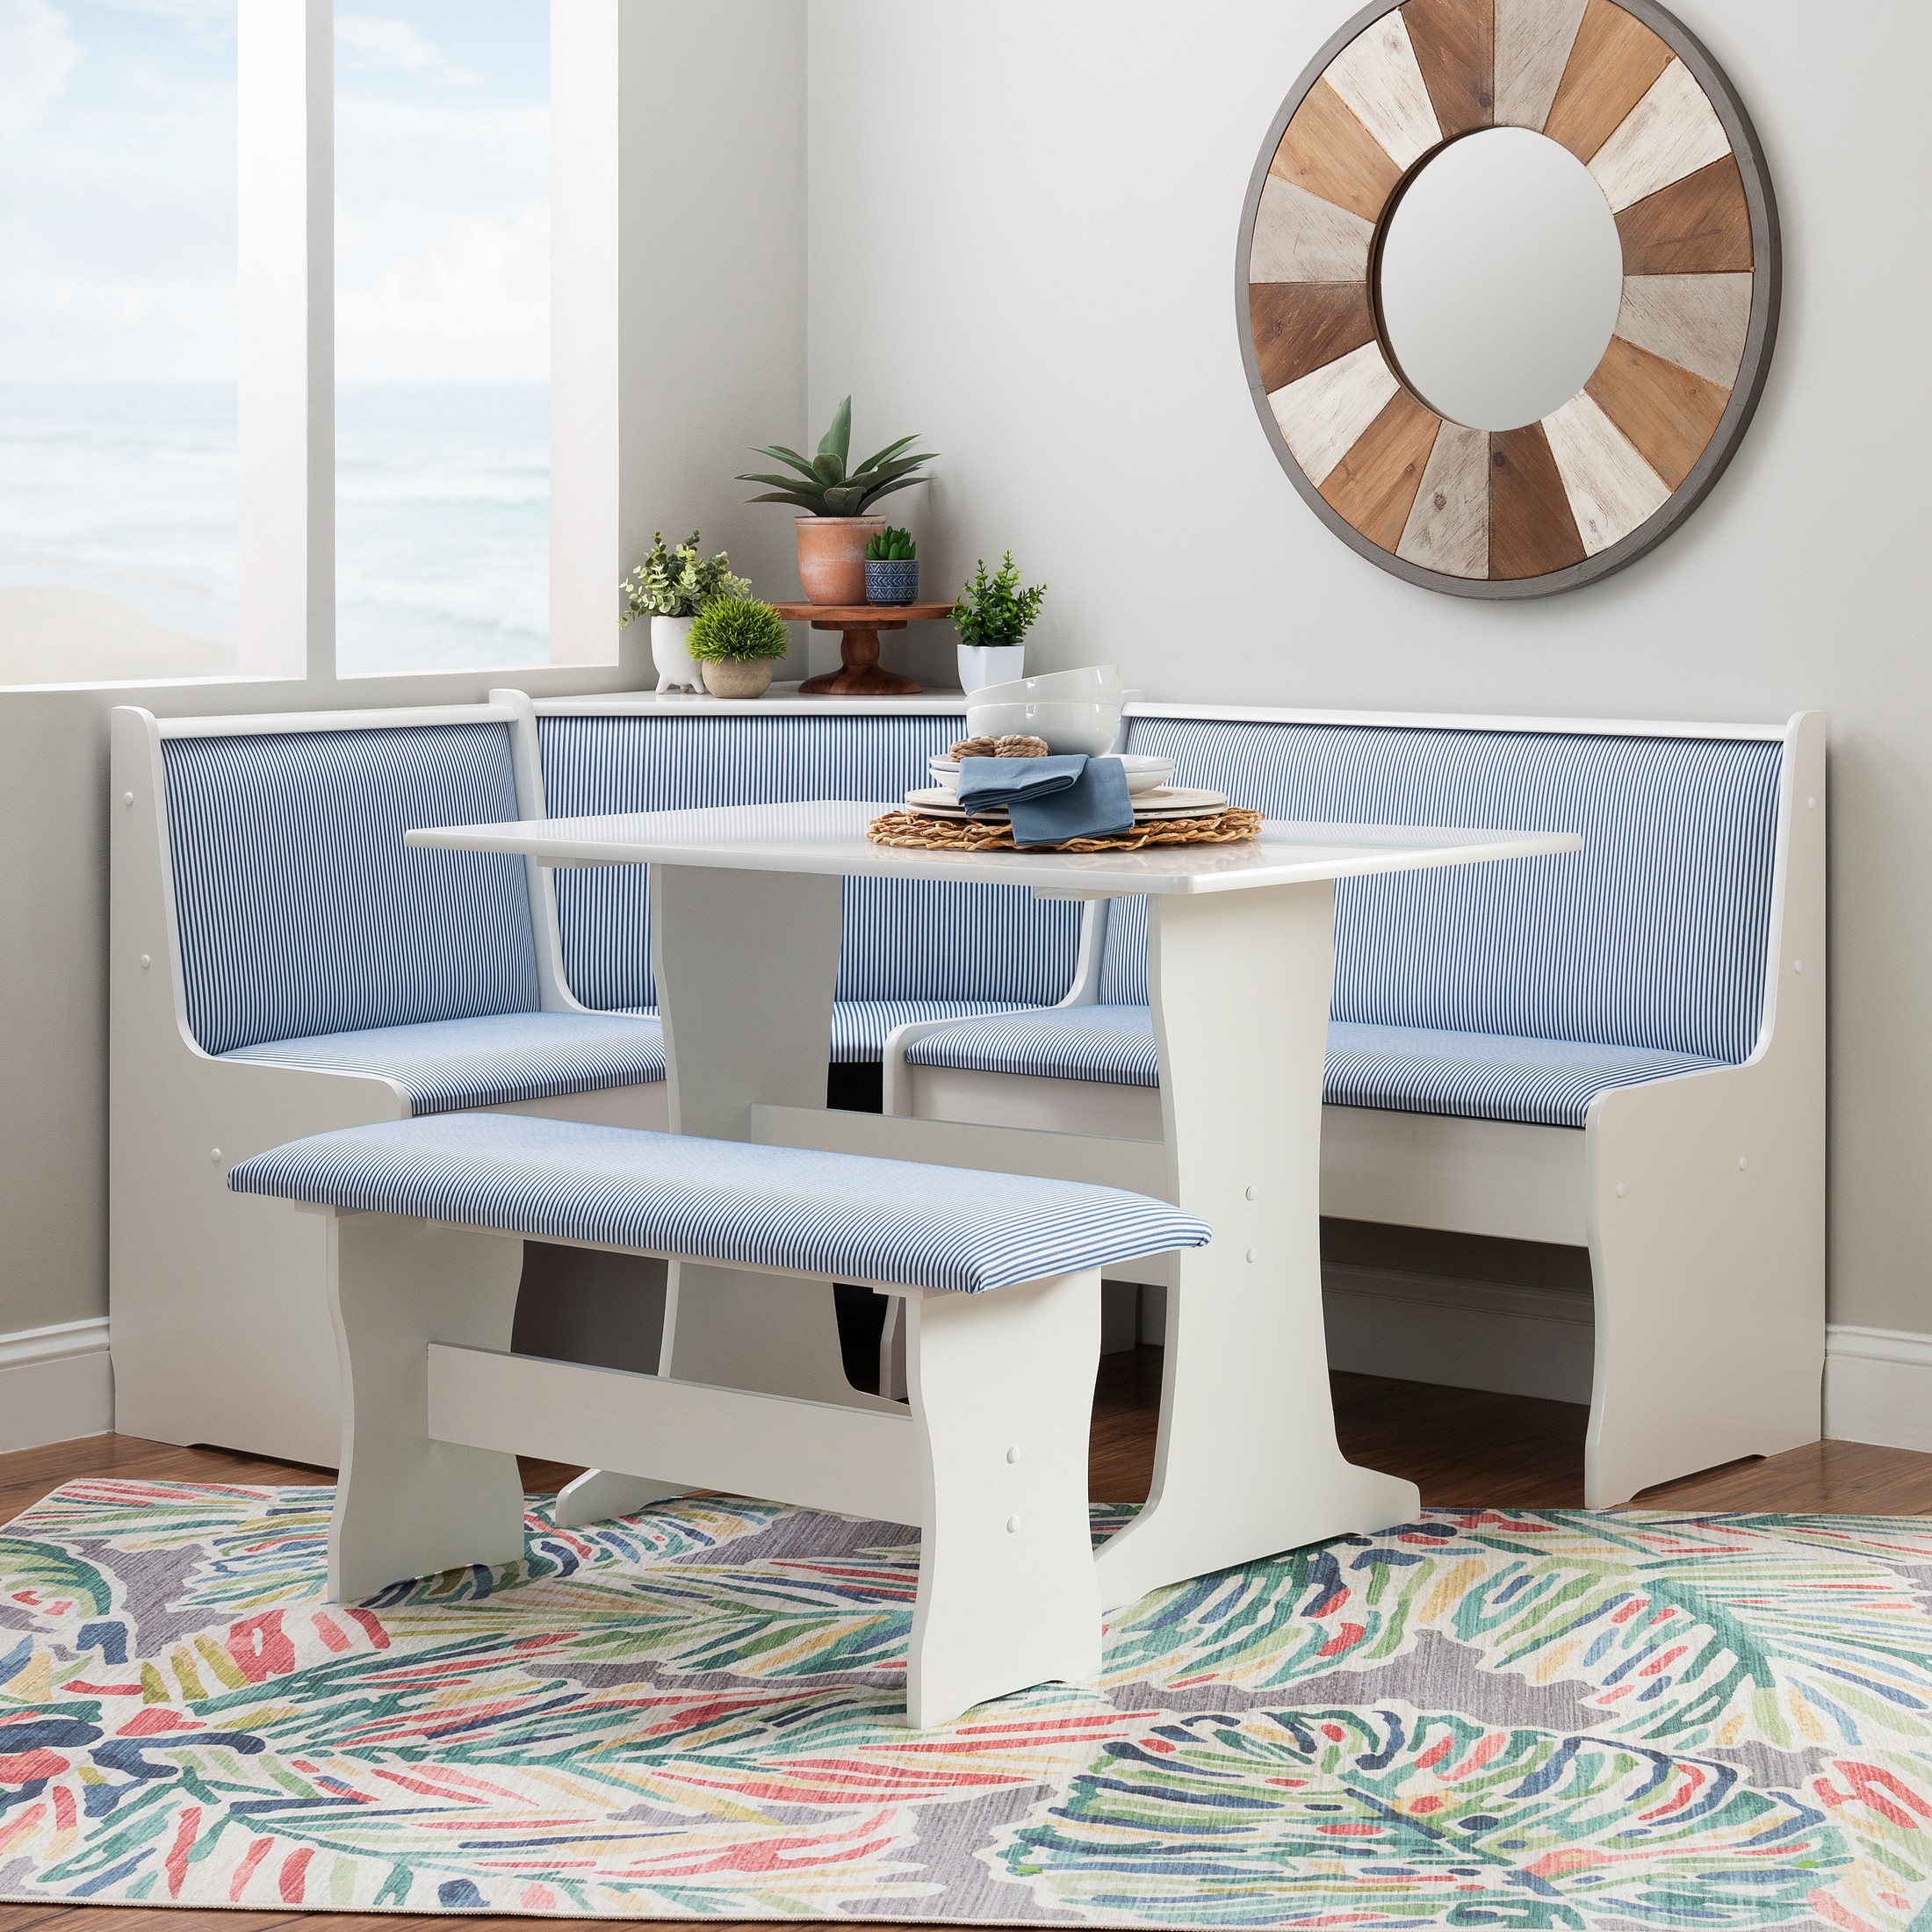 Linon Stella Corner Dining Breakfast Nook with Storage, Table and Bench, Seats 5, White with White and Striped Blue Fabric - image 2 of 28